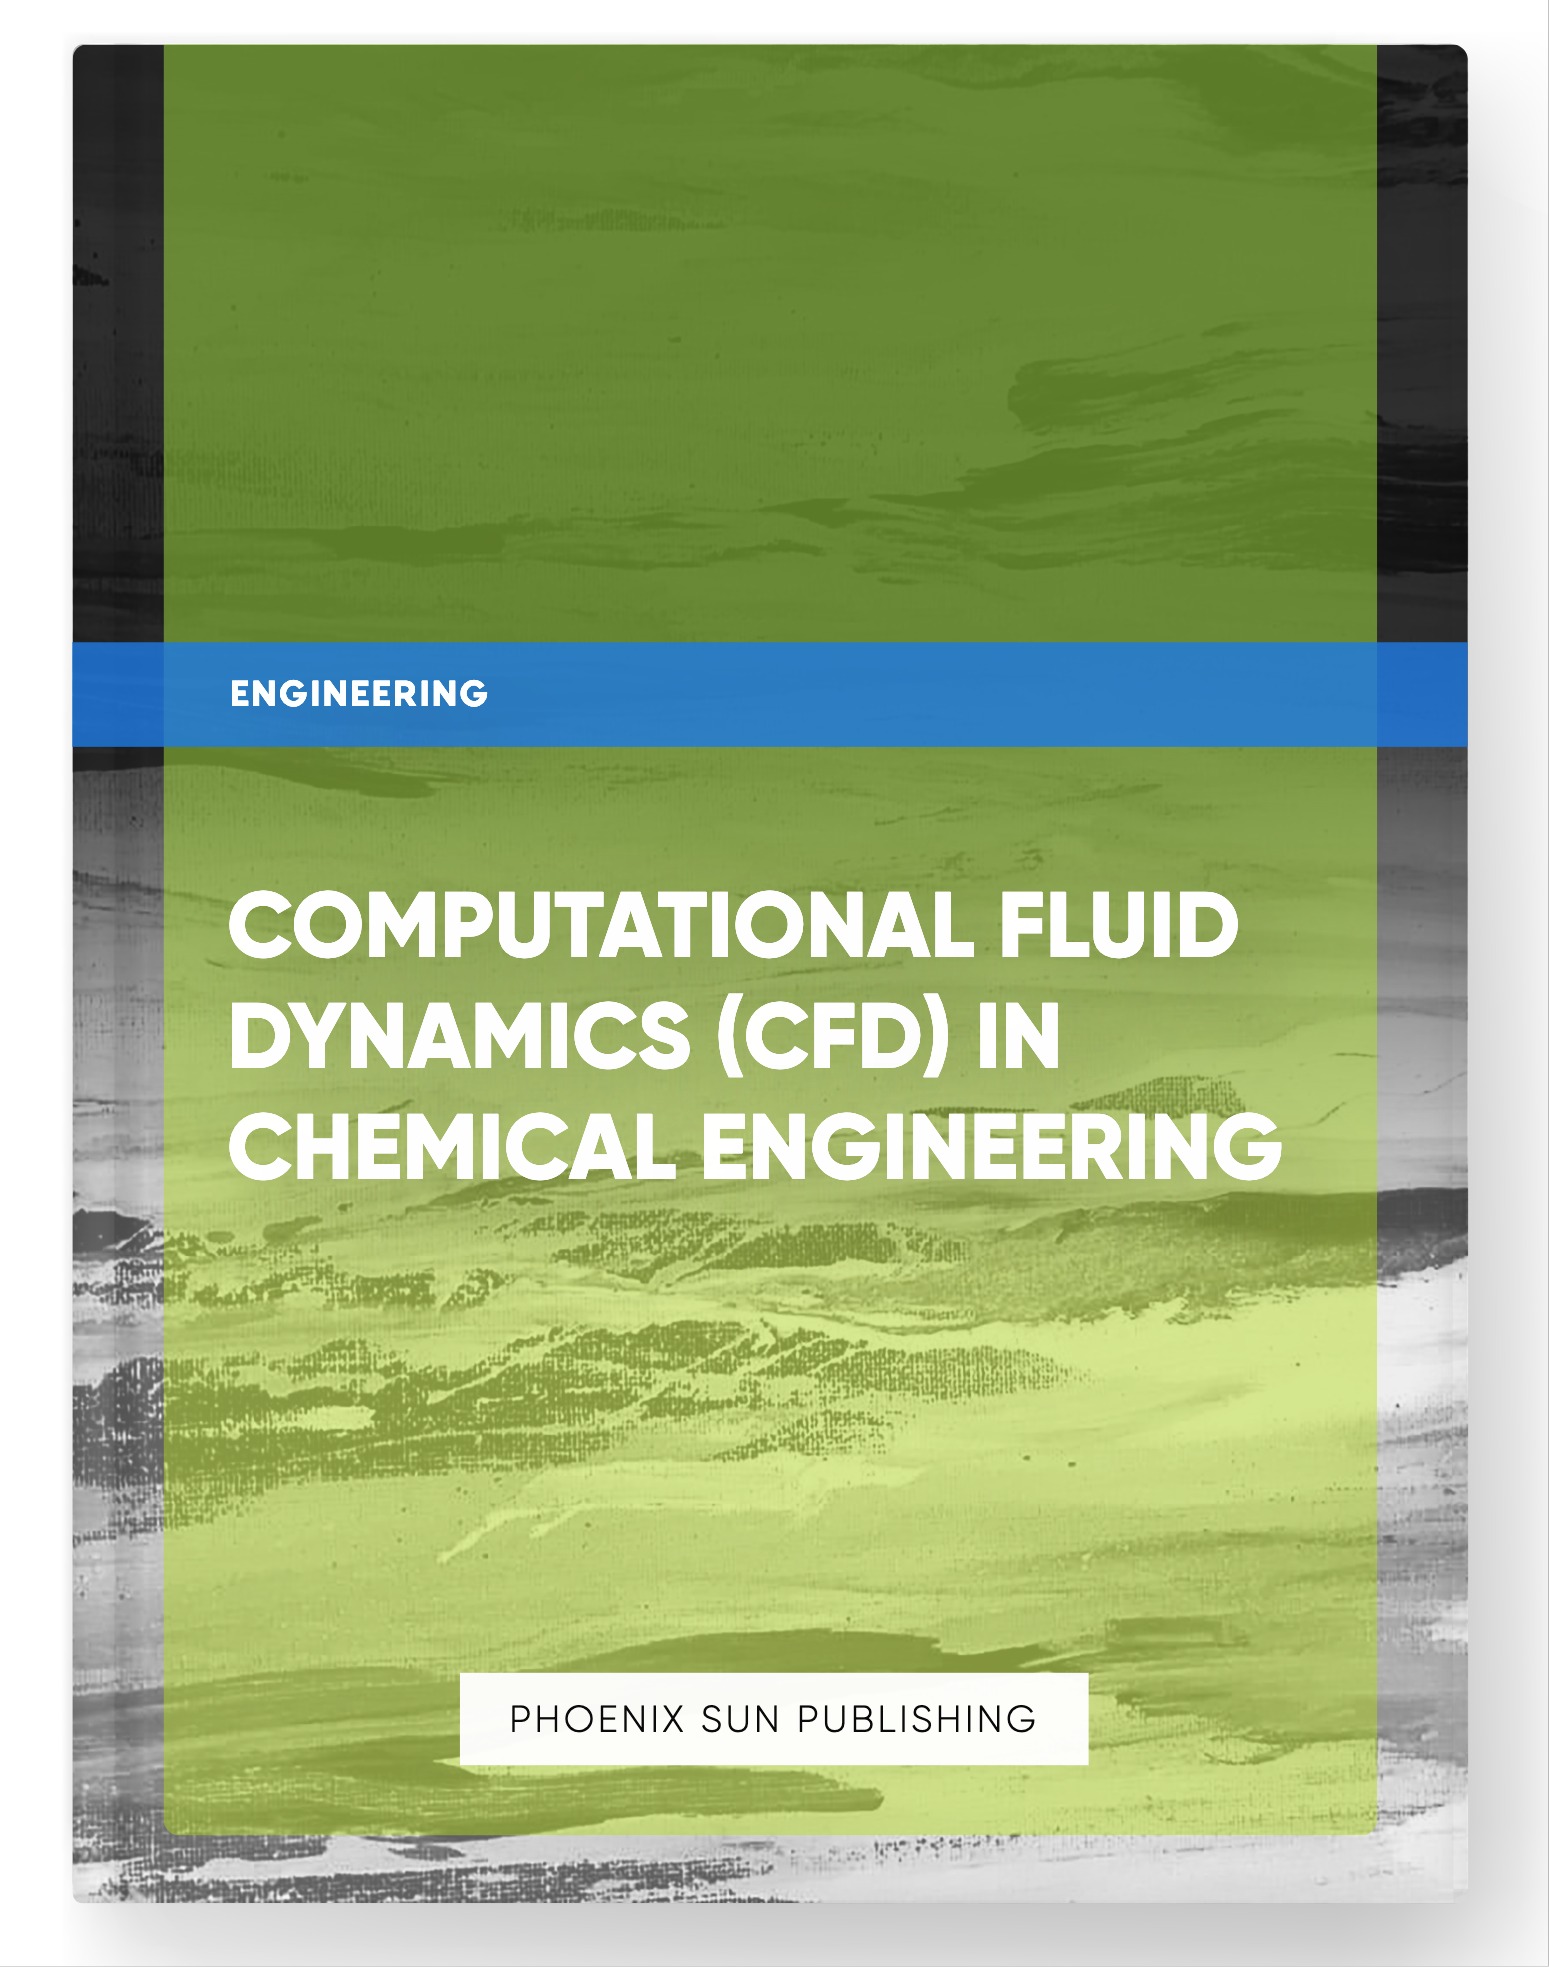 Computational Fluid Dynamics (CFD) in Chemical Engineering